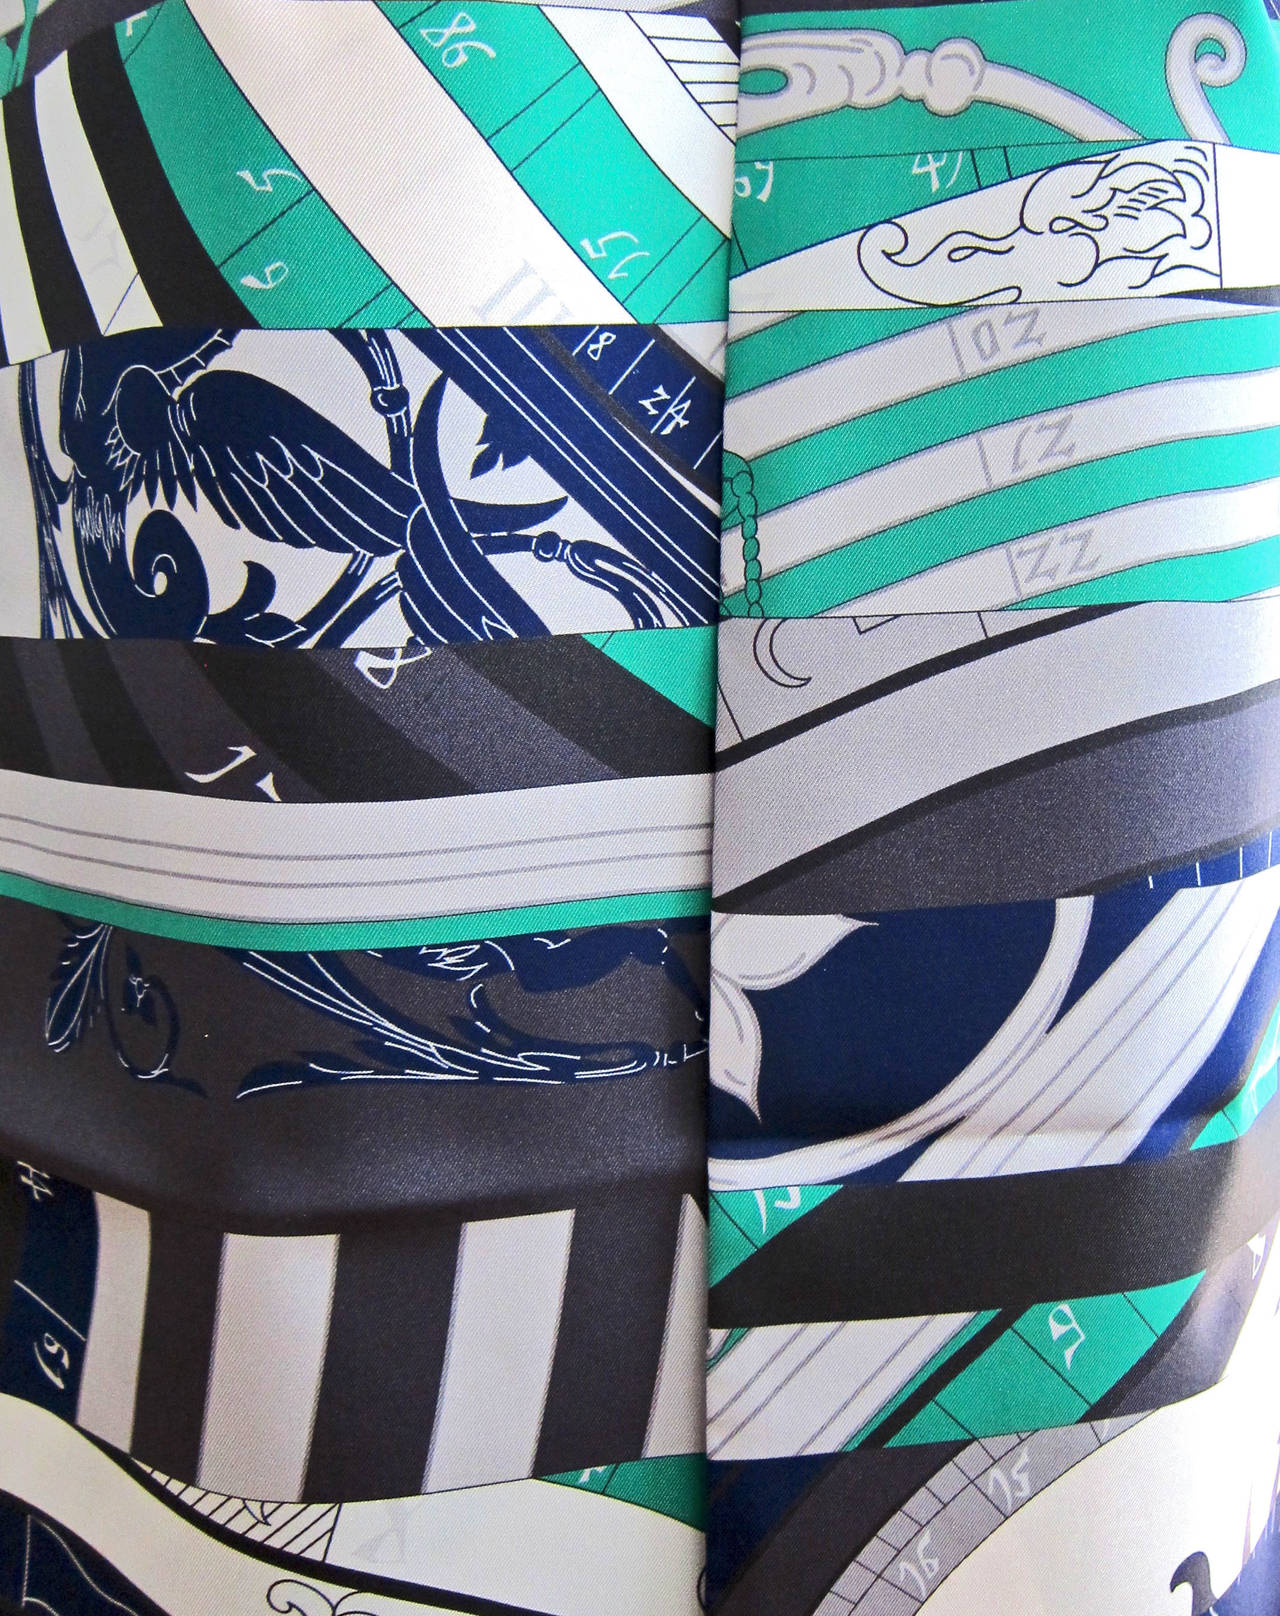 Hermes Astrologie Nouvelle Maxi Twilly Silk Scarf

Colors: Blues, green, grey, etc. 
Perfect gift! Brand new in box.
Absolutely store fresh. Never used with no issues or flaws. 
Comes brand new with Hermes Maxi Twilly cylindrical box with